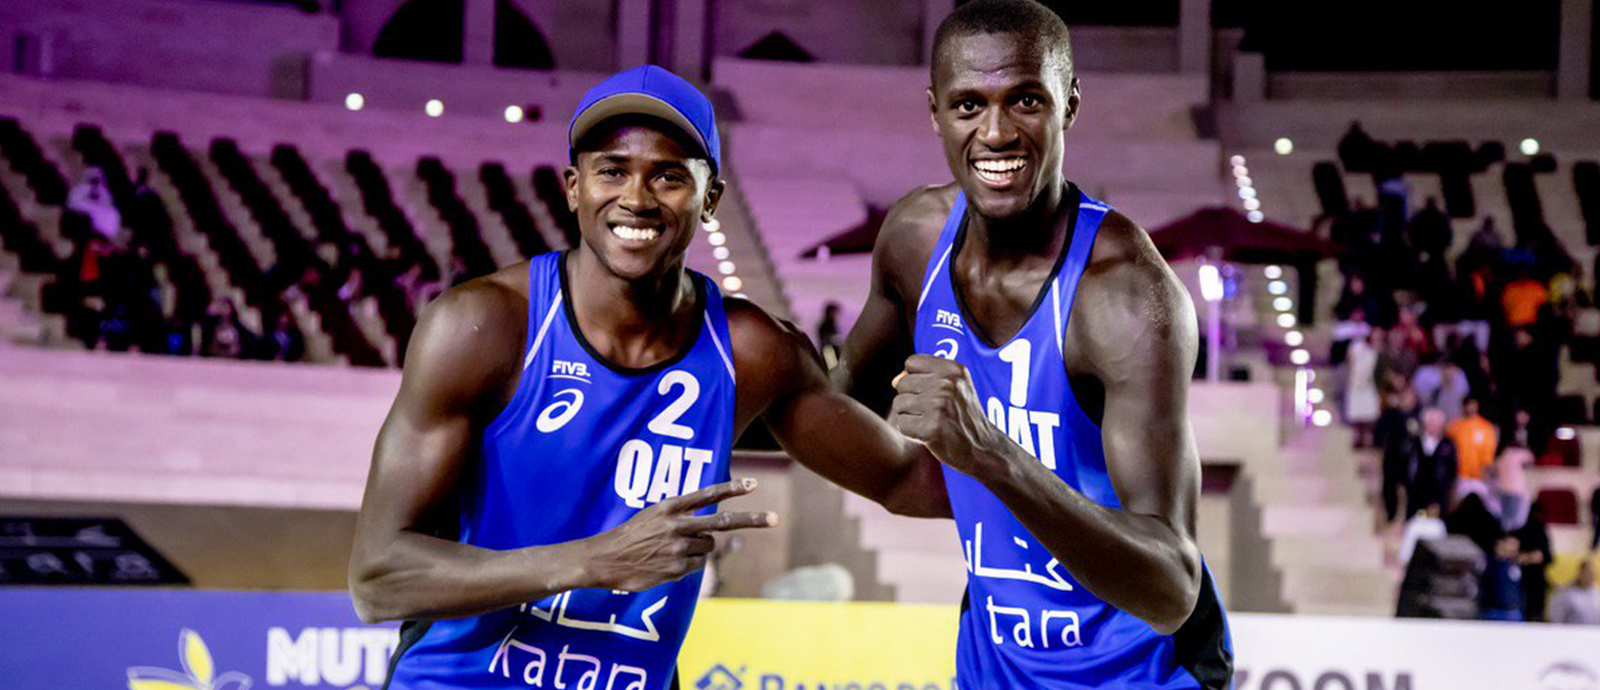 Qatar’s Younousse and Tijan